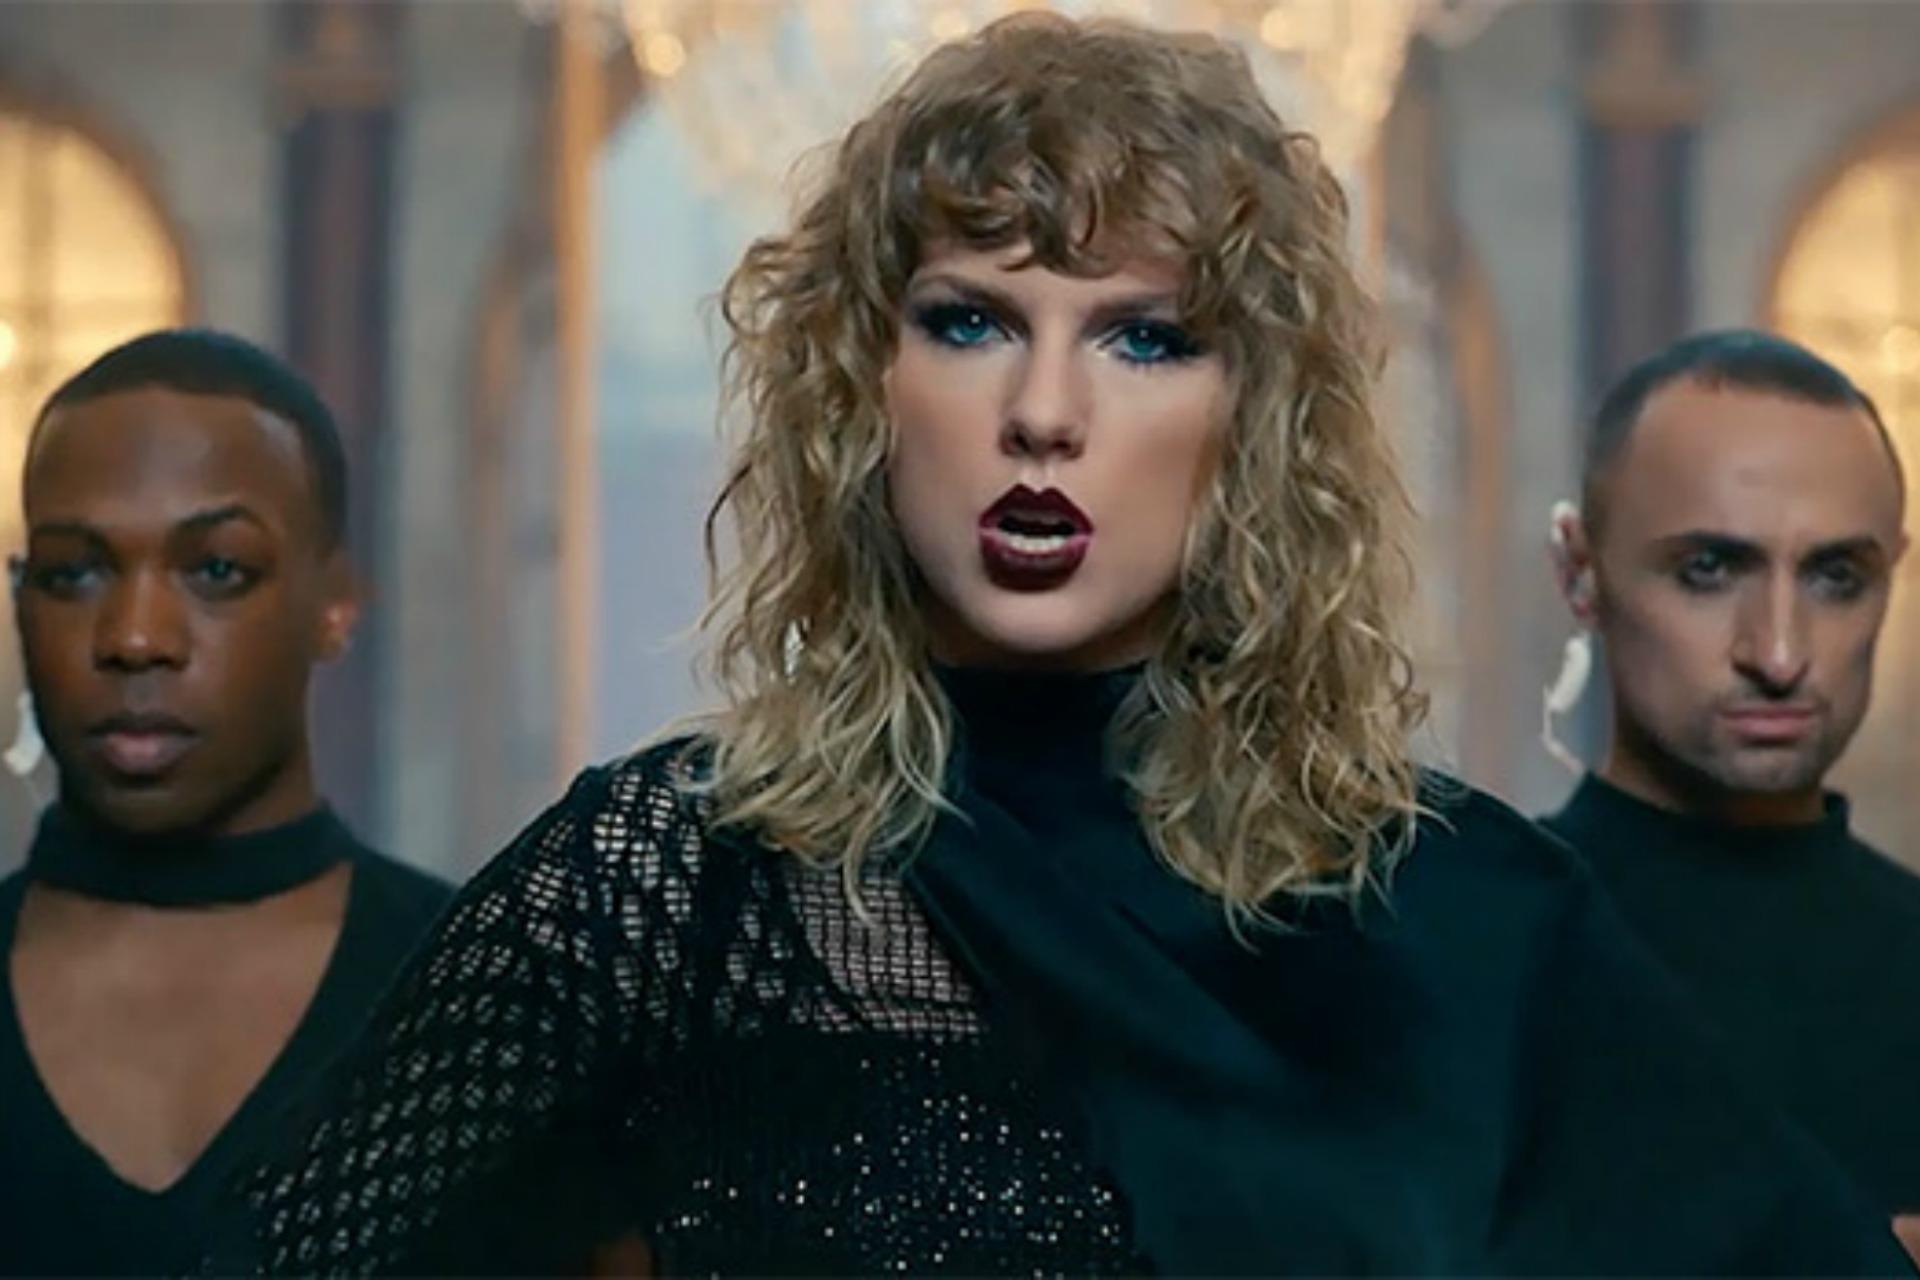 Taylor Swift Is So Sick Of Everyone Talking About Her That She Made